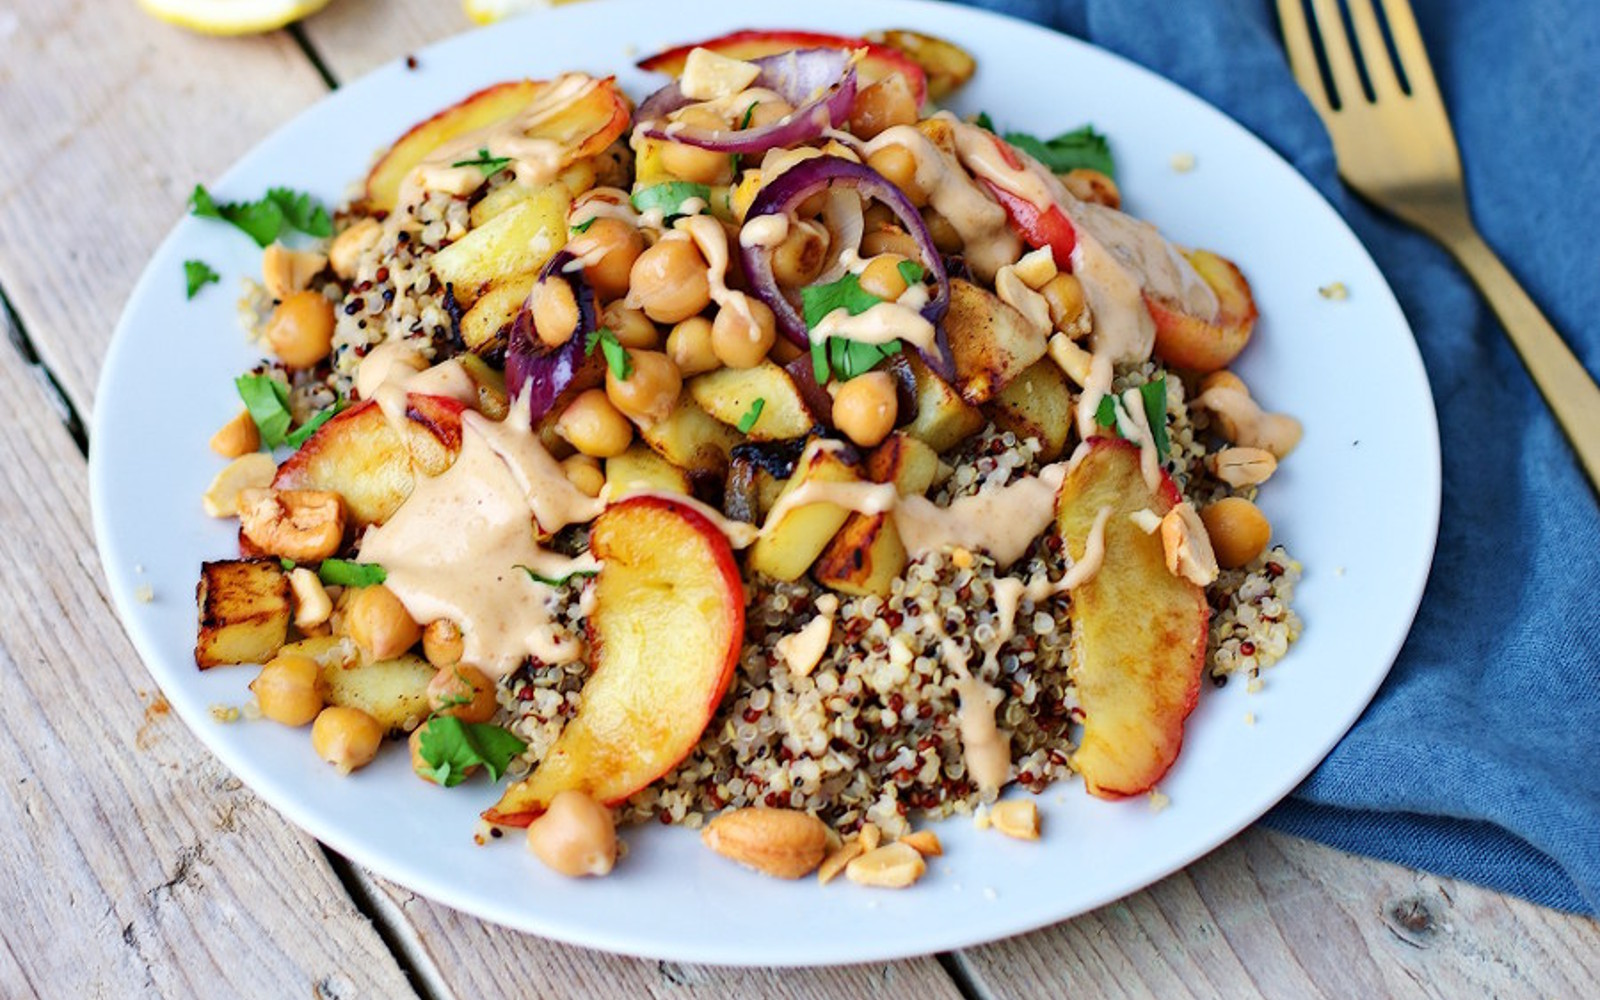 Skillet Potatoes With Chickpeas and Apples